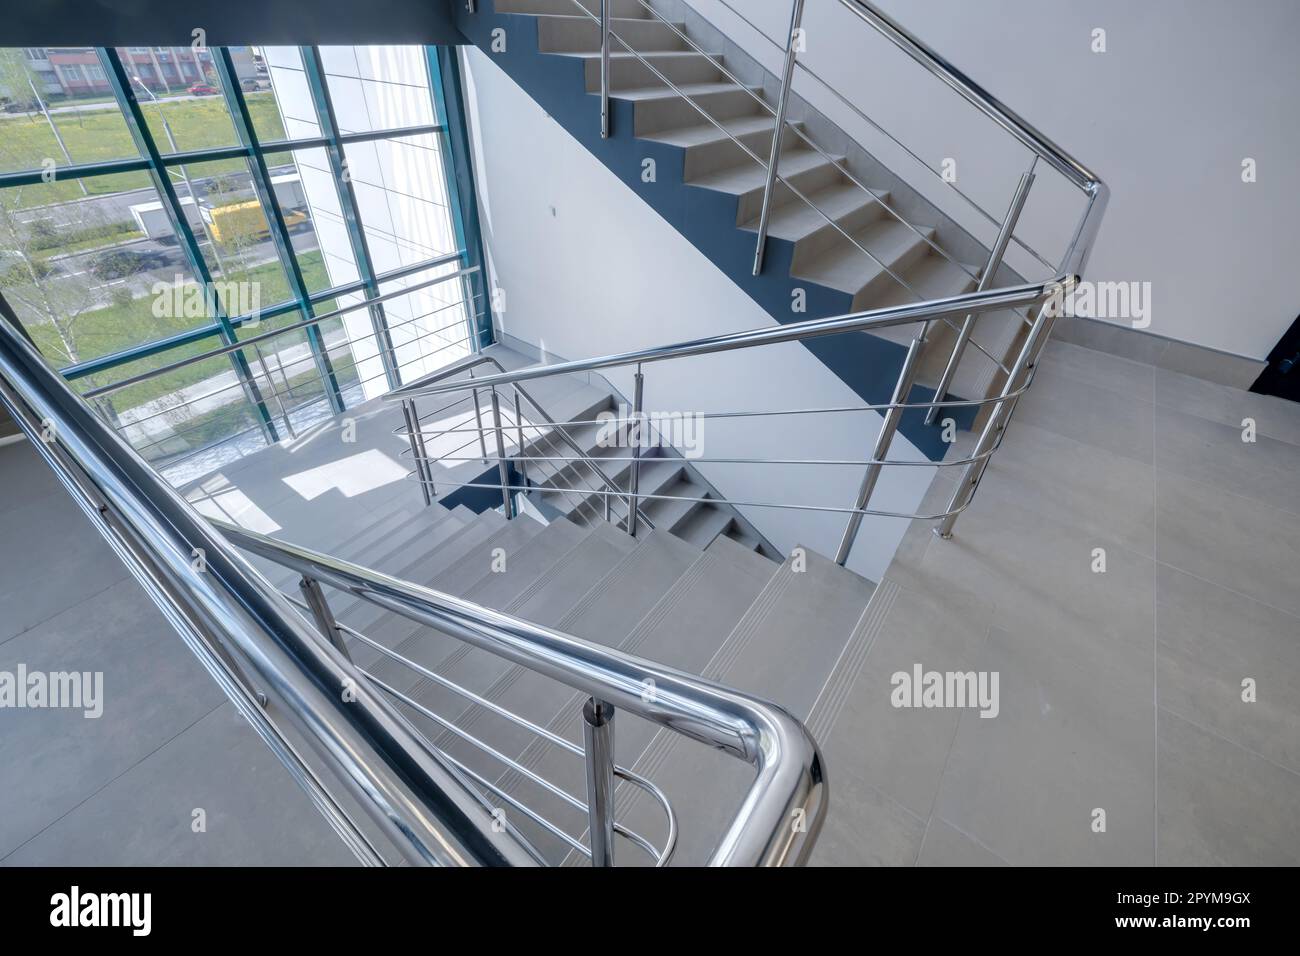 stairs  emergency and evacuation exit stair in up ladder in a new office building. Stock Photo